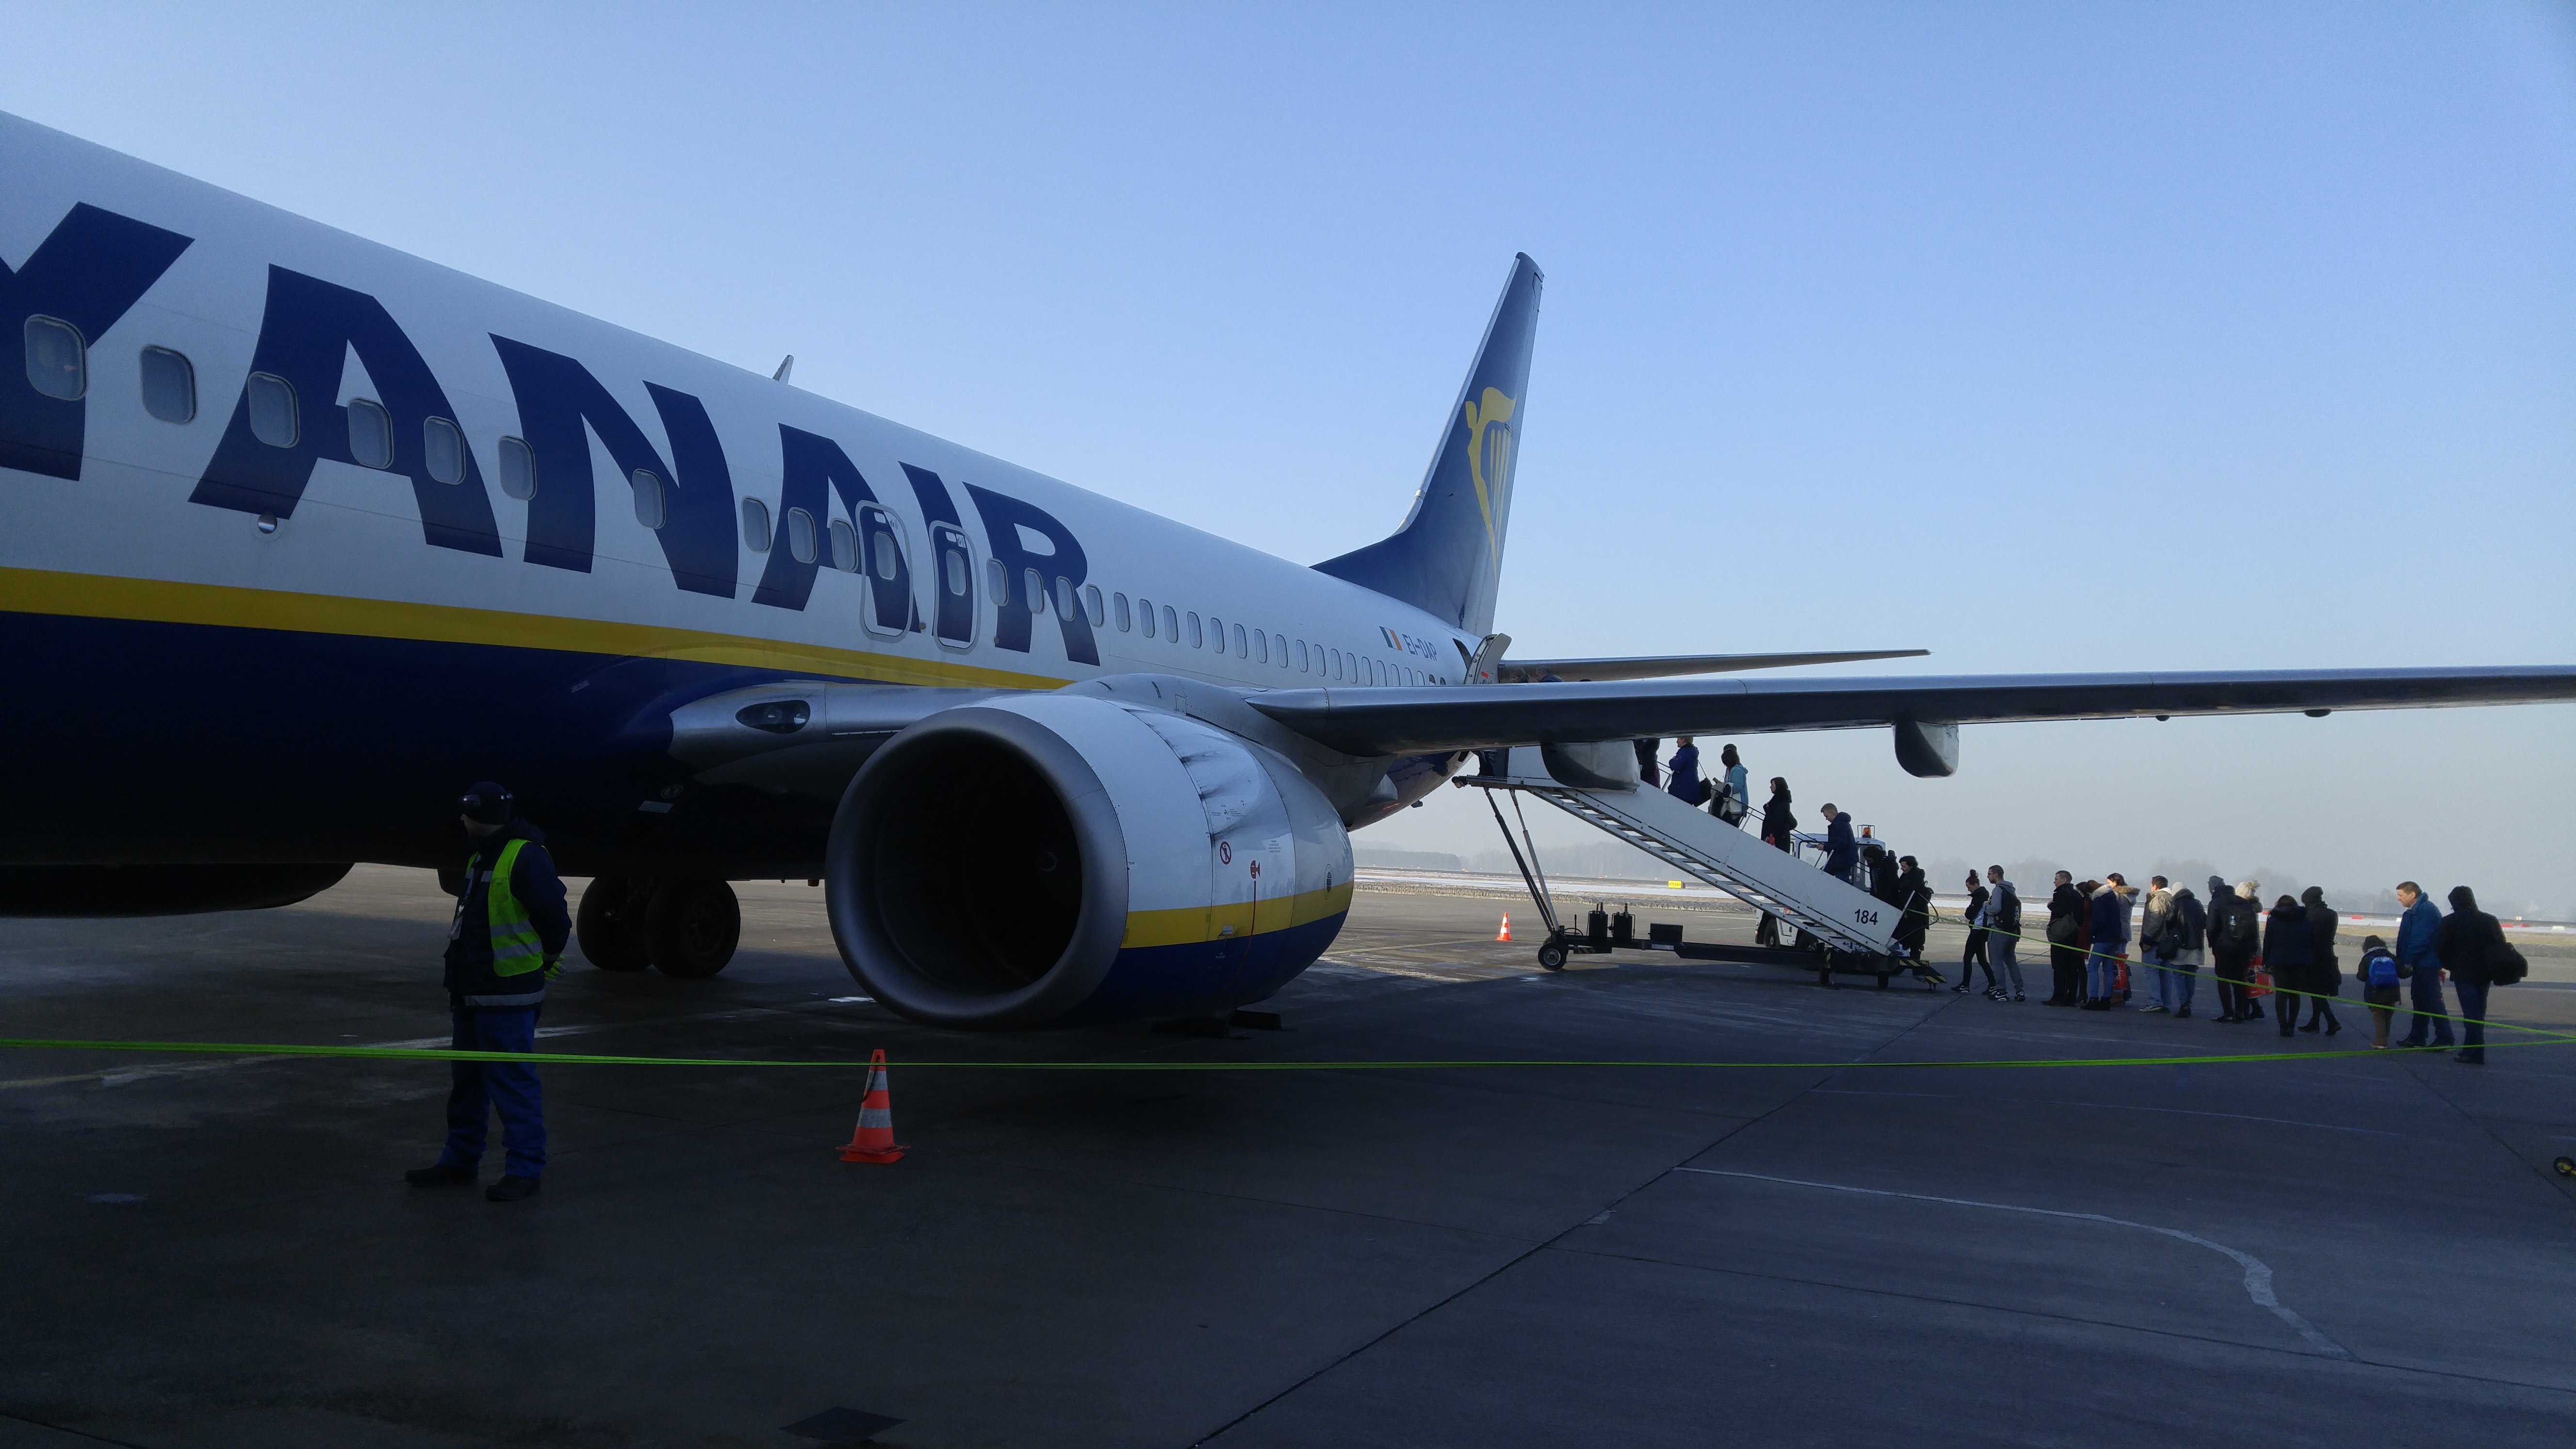 <span  class="uc_style_uc_tiles_grid_image_elementor_uc_items_attribute_title" style="color:#ffffff;">Ryanair - samolot</span>